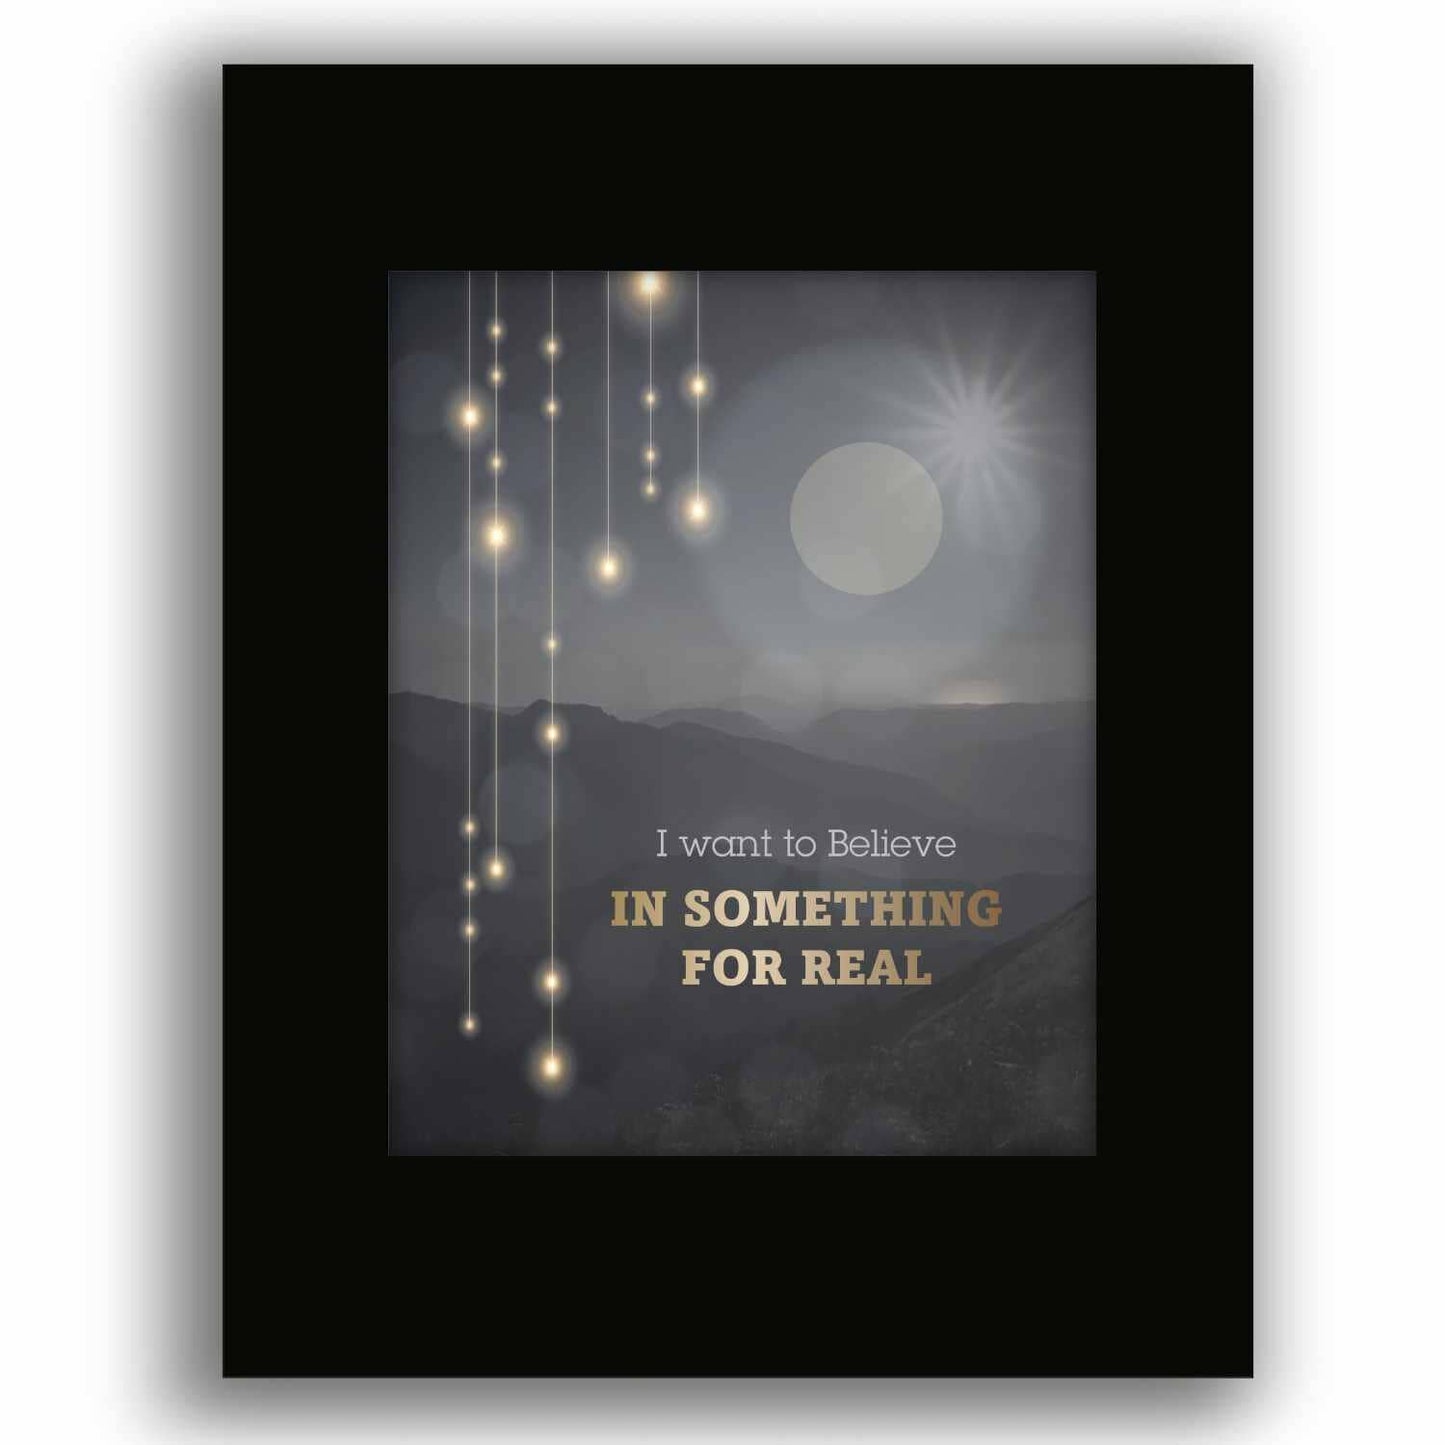 I Want to Believe by Sass Jordan - 80s Music Lyric Art Print Song Lyrics Art Song Lyrics Art 8x10 Black Matted Print 